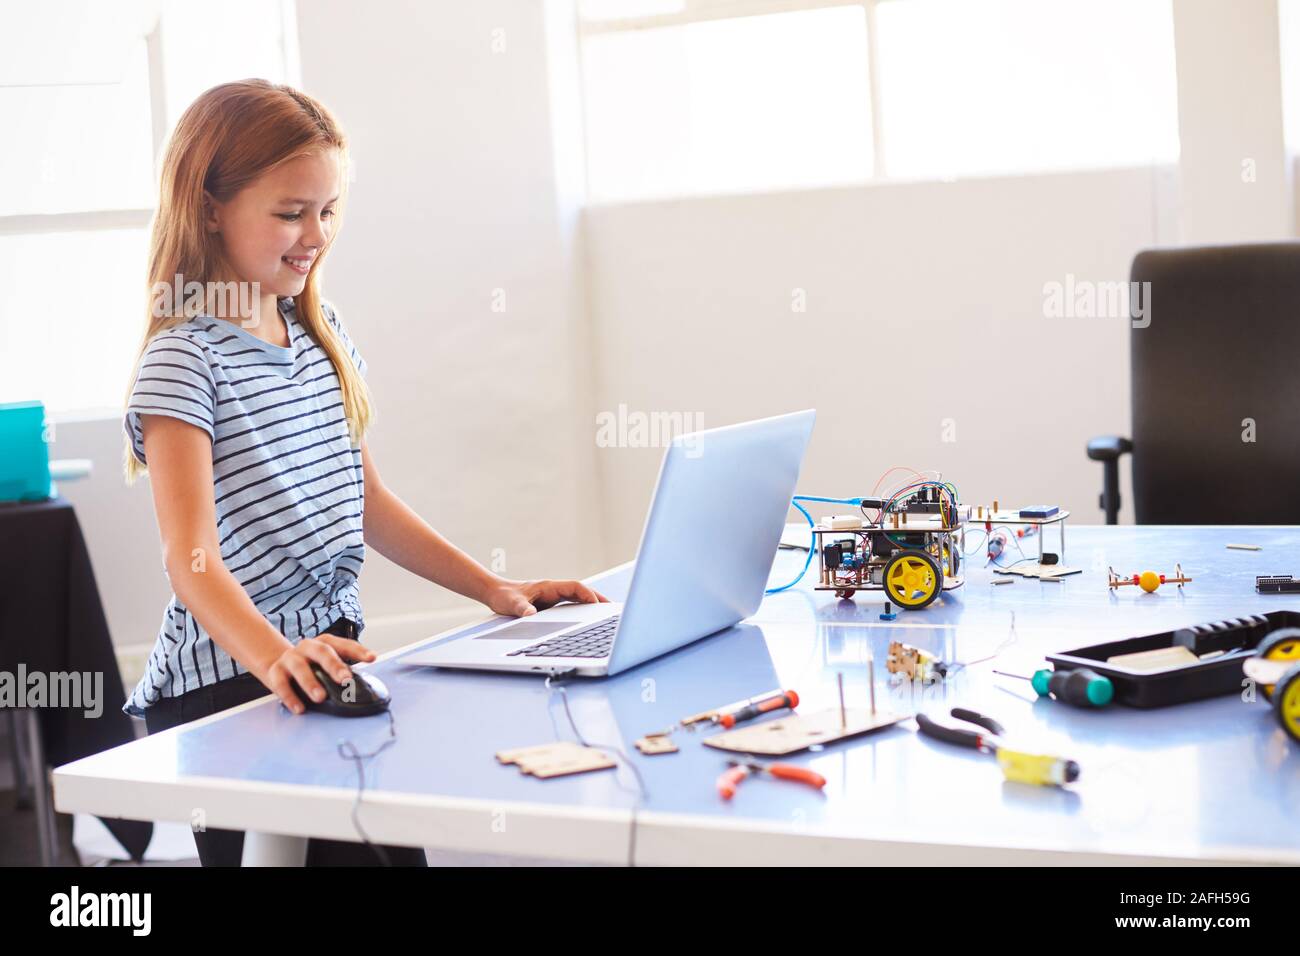 Female Student Building And Programing Robot Vehicle In After School Computer Coding Class Stock Photo